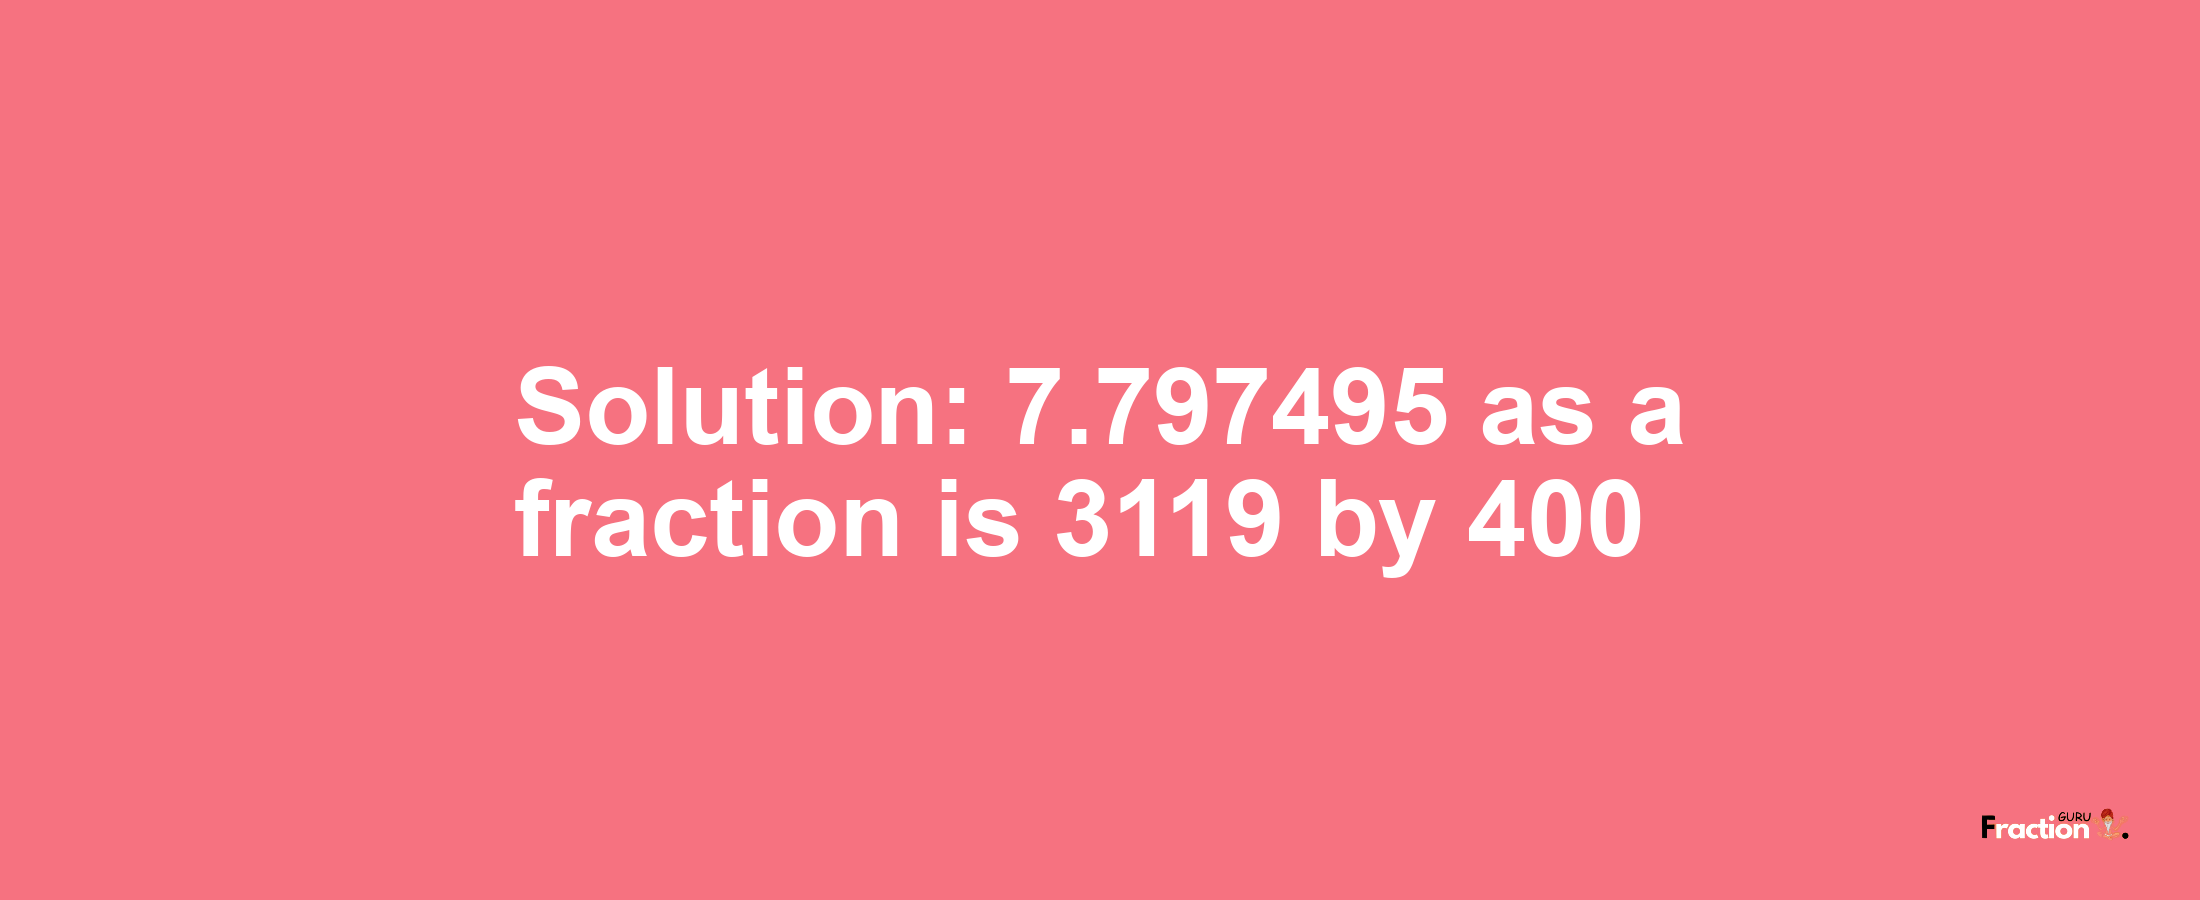 Solution:7.797495 as a fraction is 3119/400